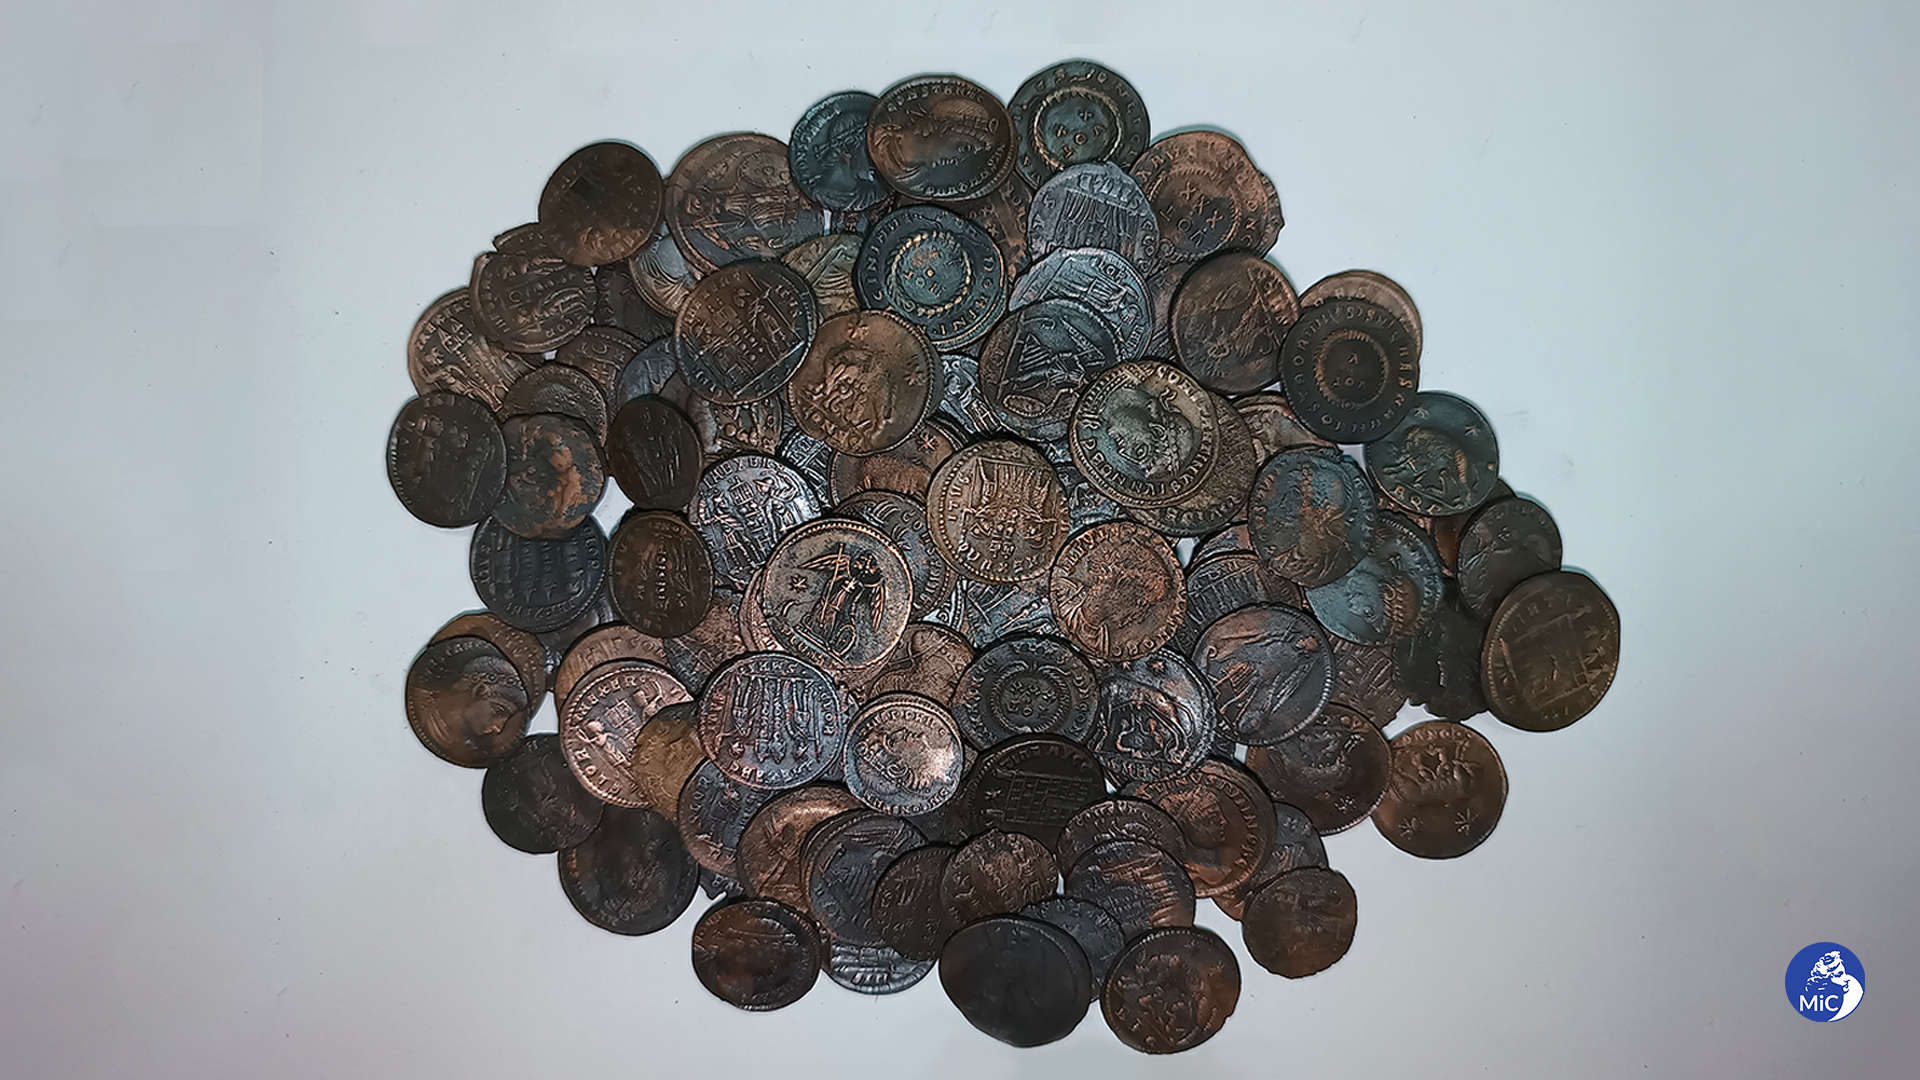 Extraordinary discovery in Sardinia: huge treasure trove of well-preserved  Roman coins